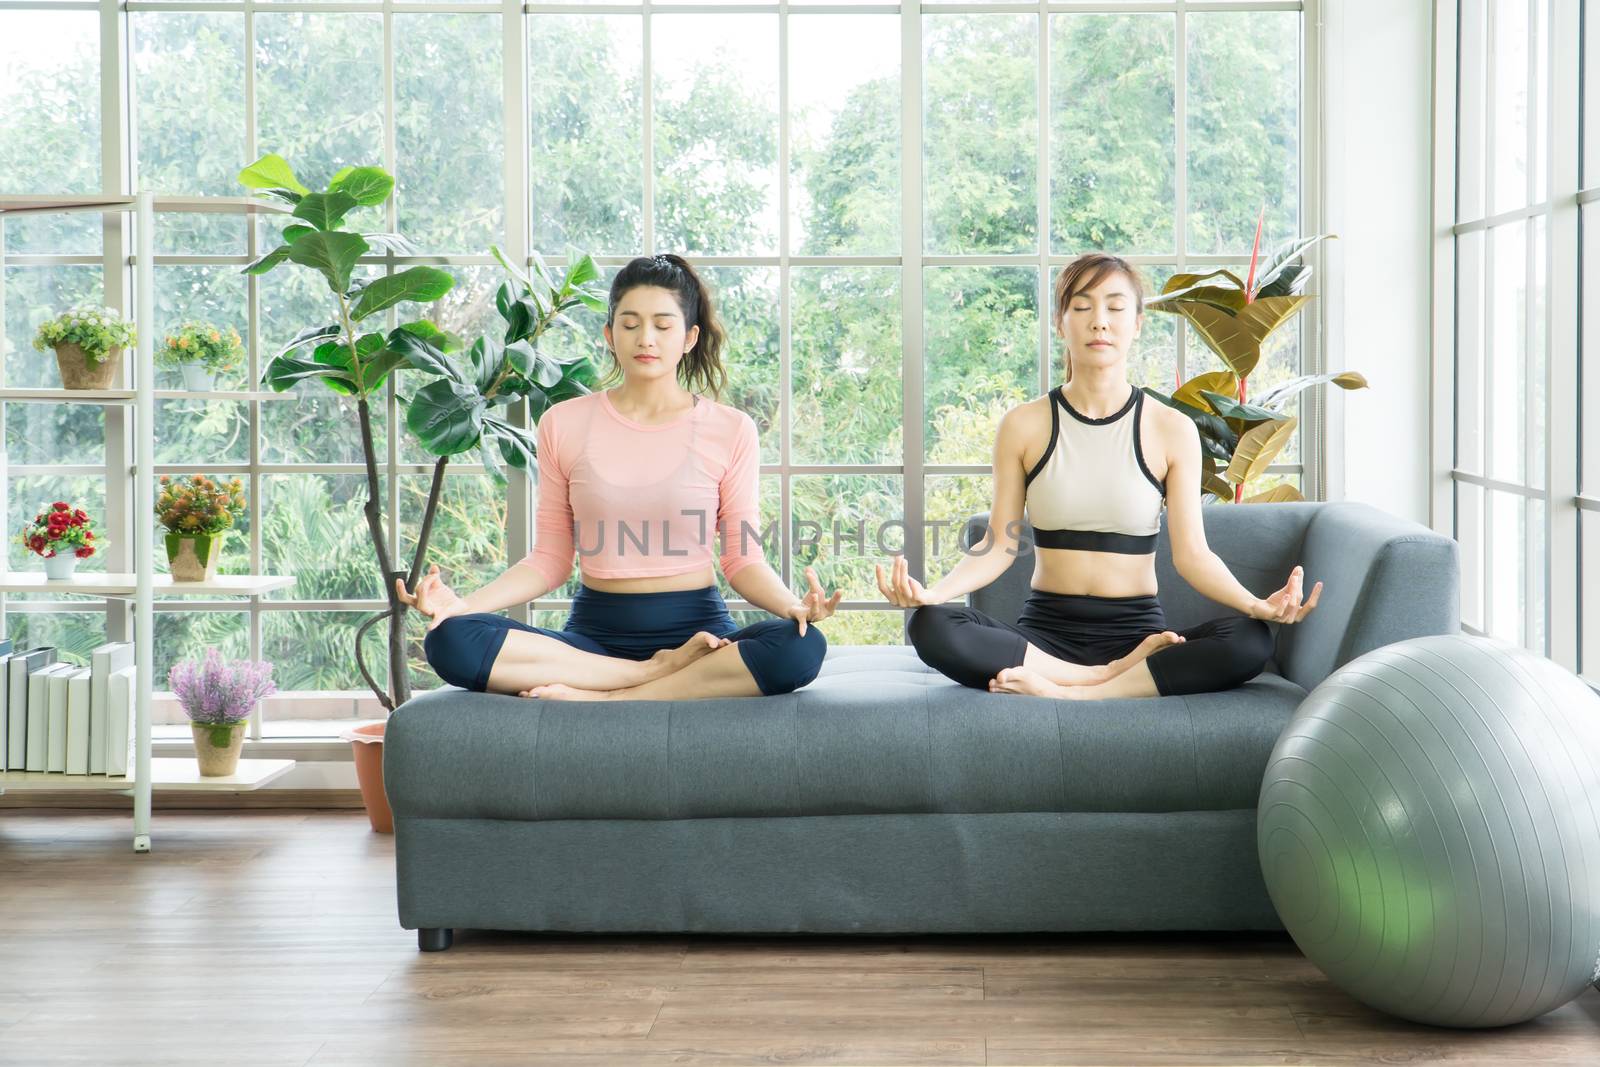 Attractive and healthy women Two Asians Exercising Stretching the muscles with yoga postures together at home. Help balance life